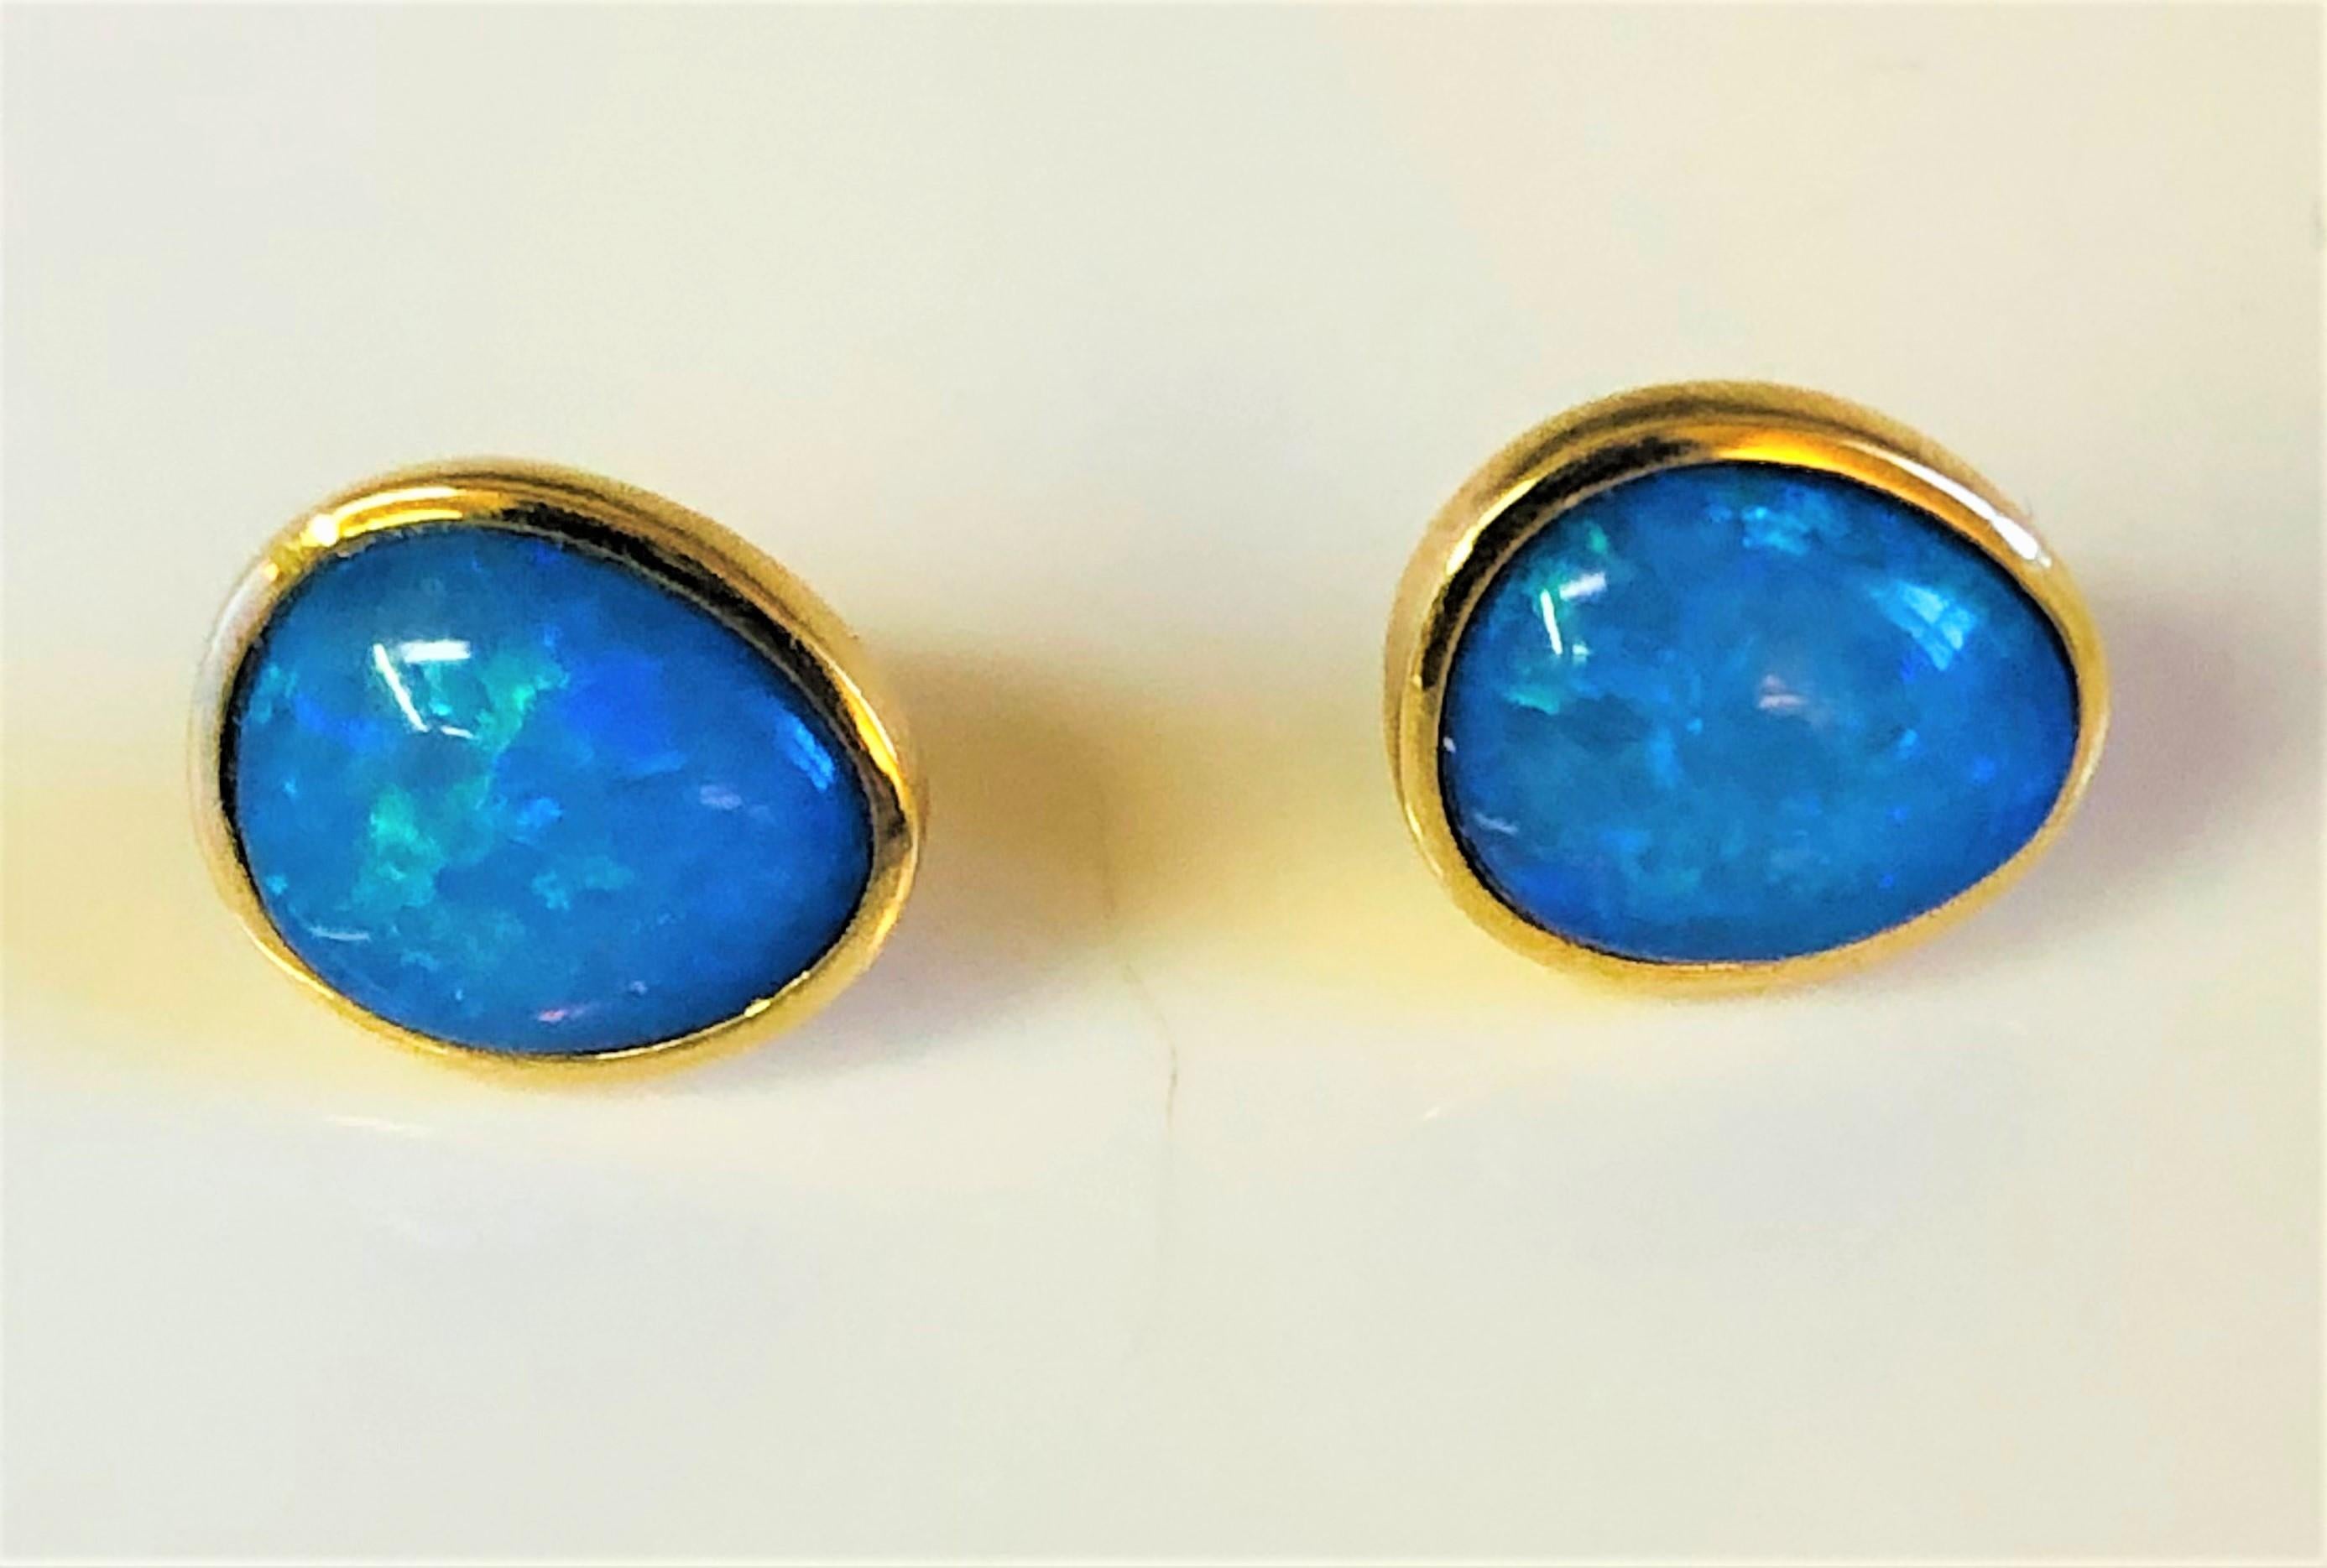 These natural blue opals are gorgeous and will be a favorite!
14 karat yellow gold tear drop shape, bezel set.
Natural blue stone with beautiful fleck.
Approximately 13 mm X 11mm.
Stamped 